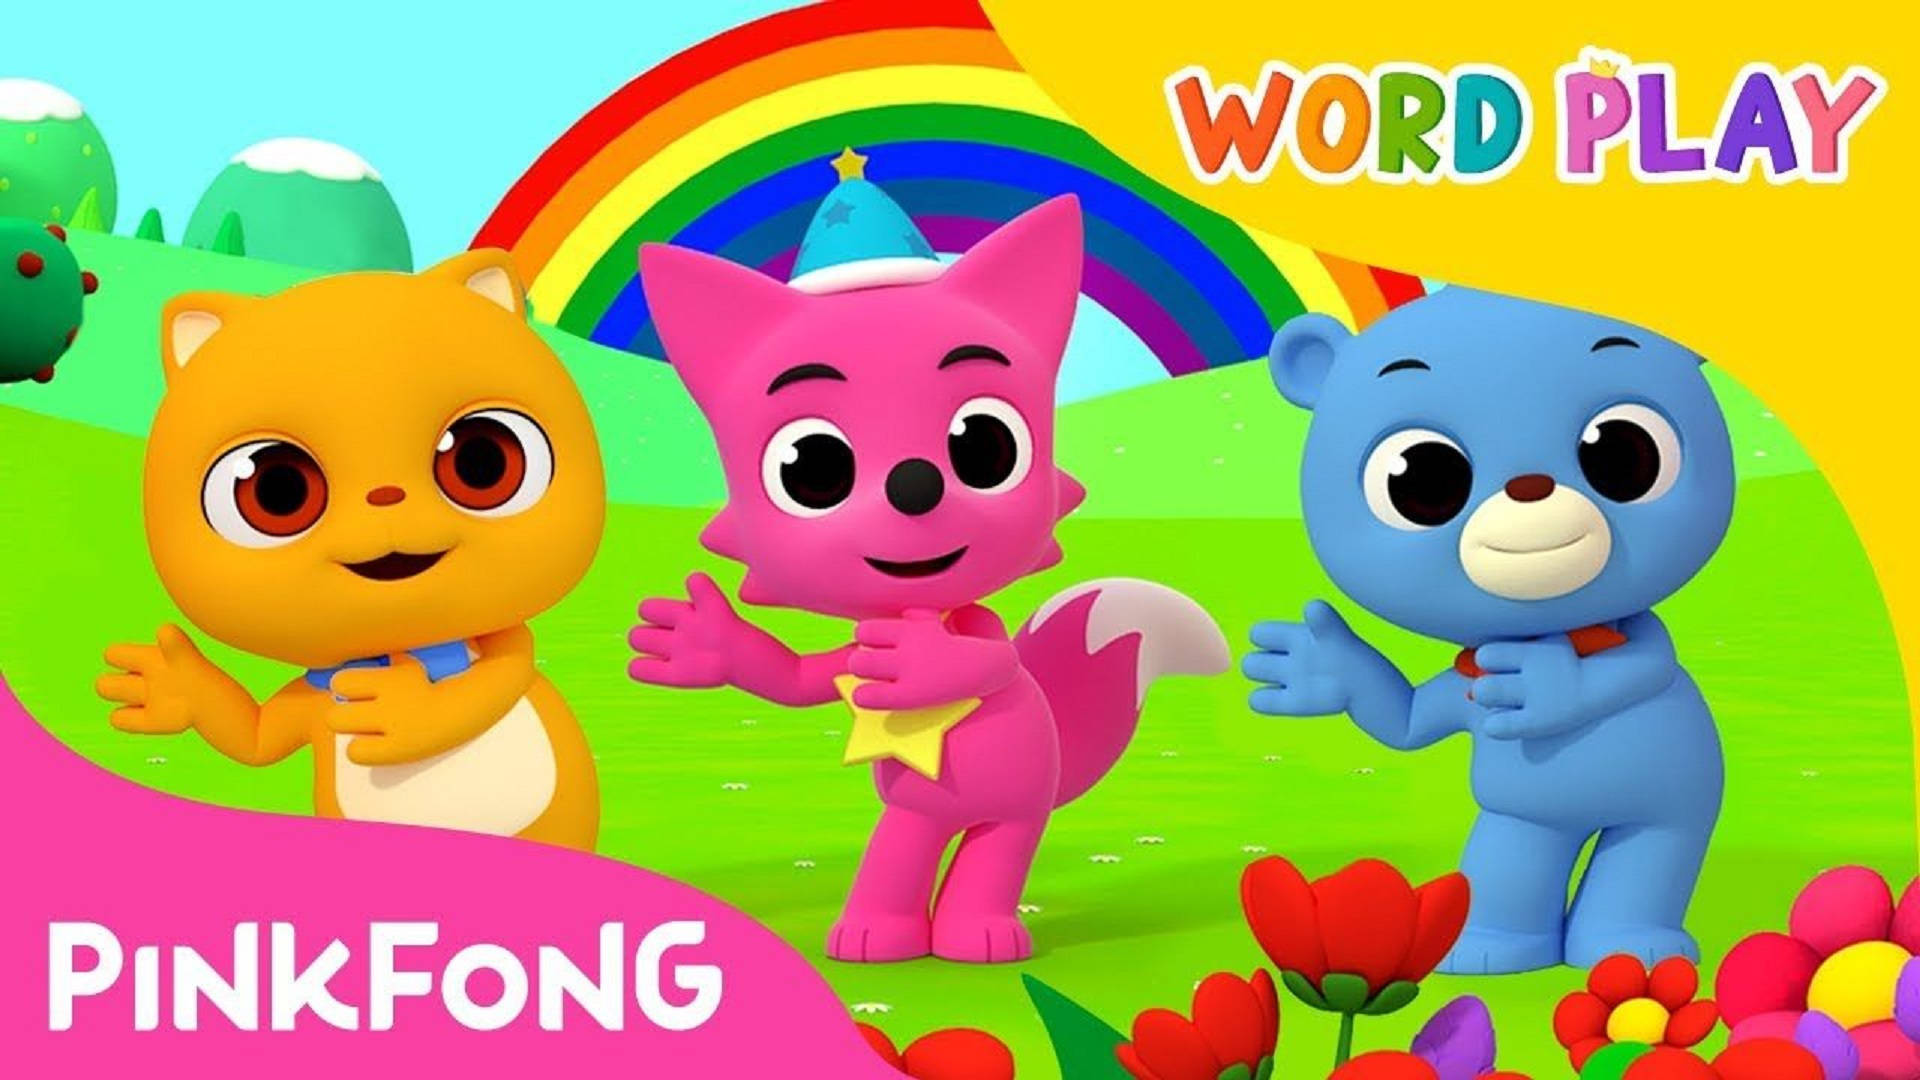 Pinkfong Word Play Background